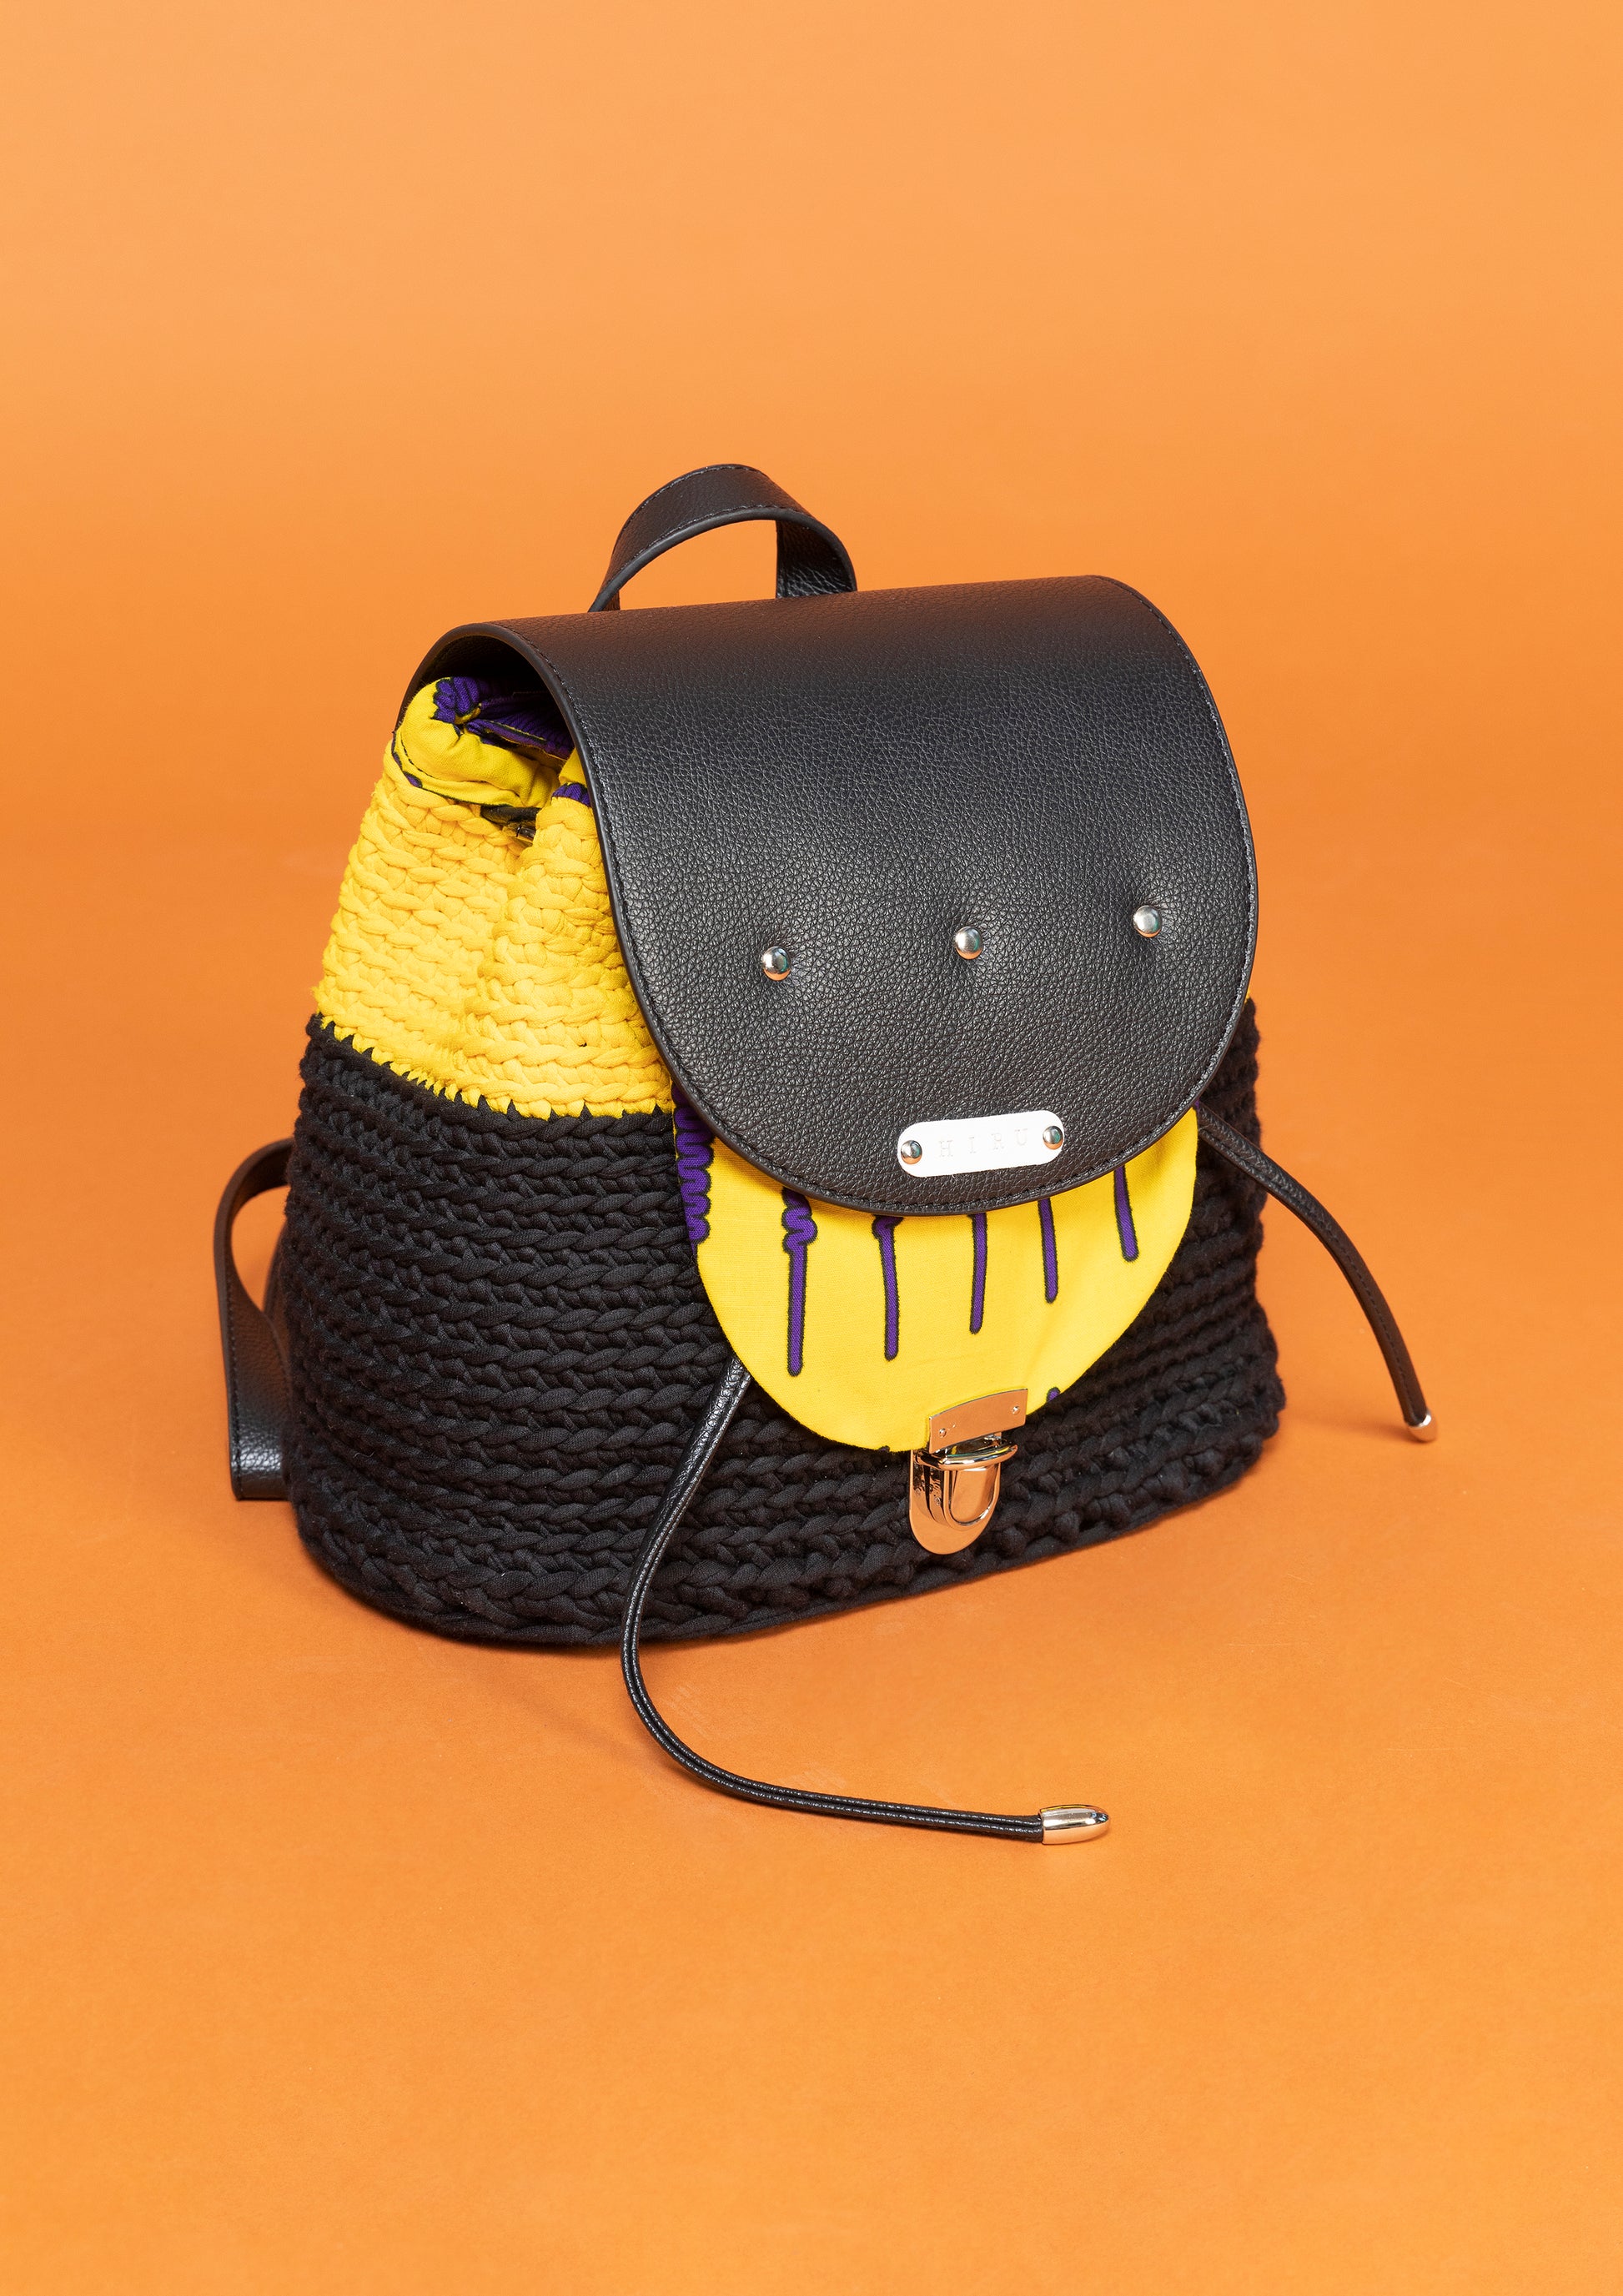 crocheted, black and yellow bag, with an African style print